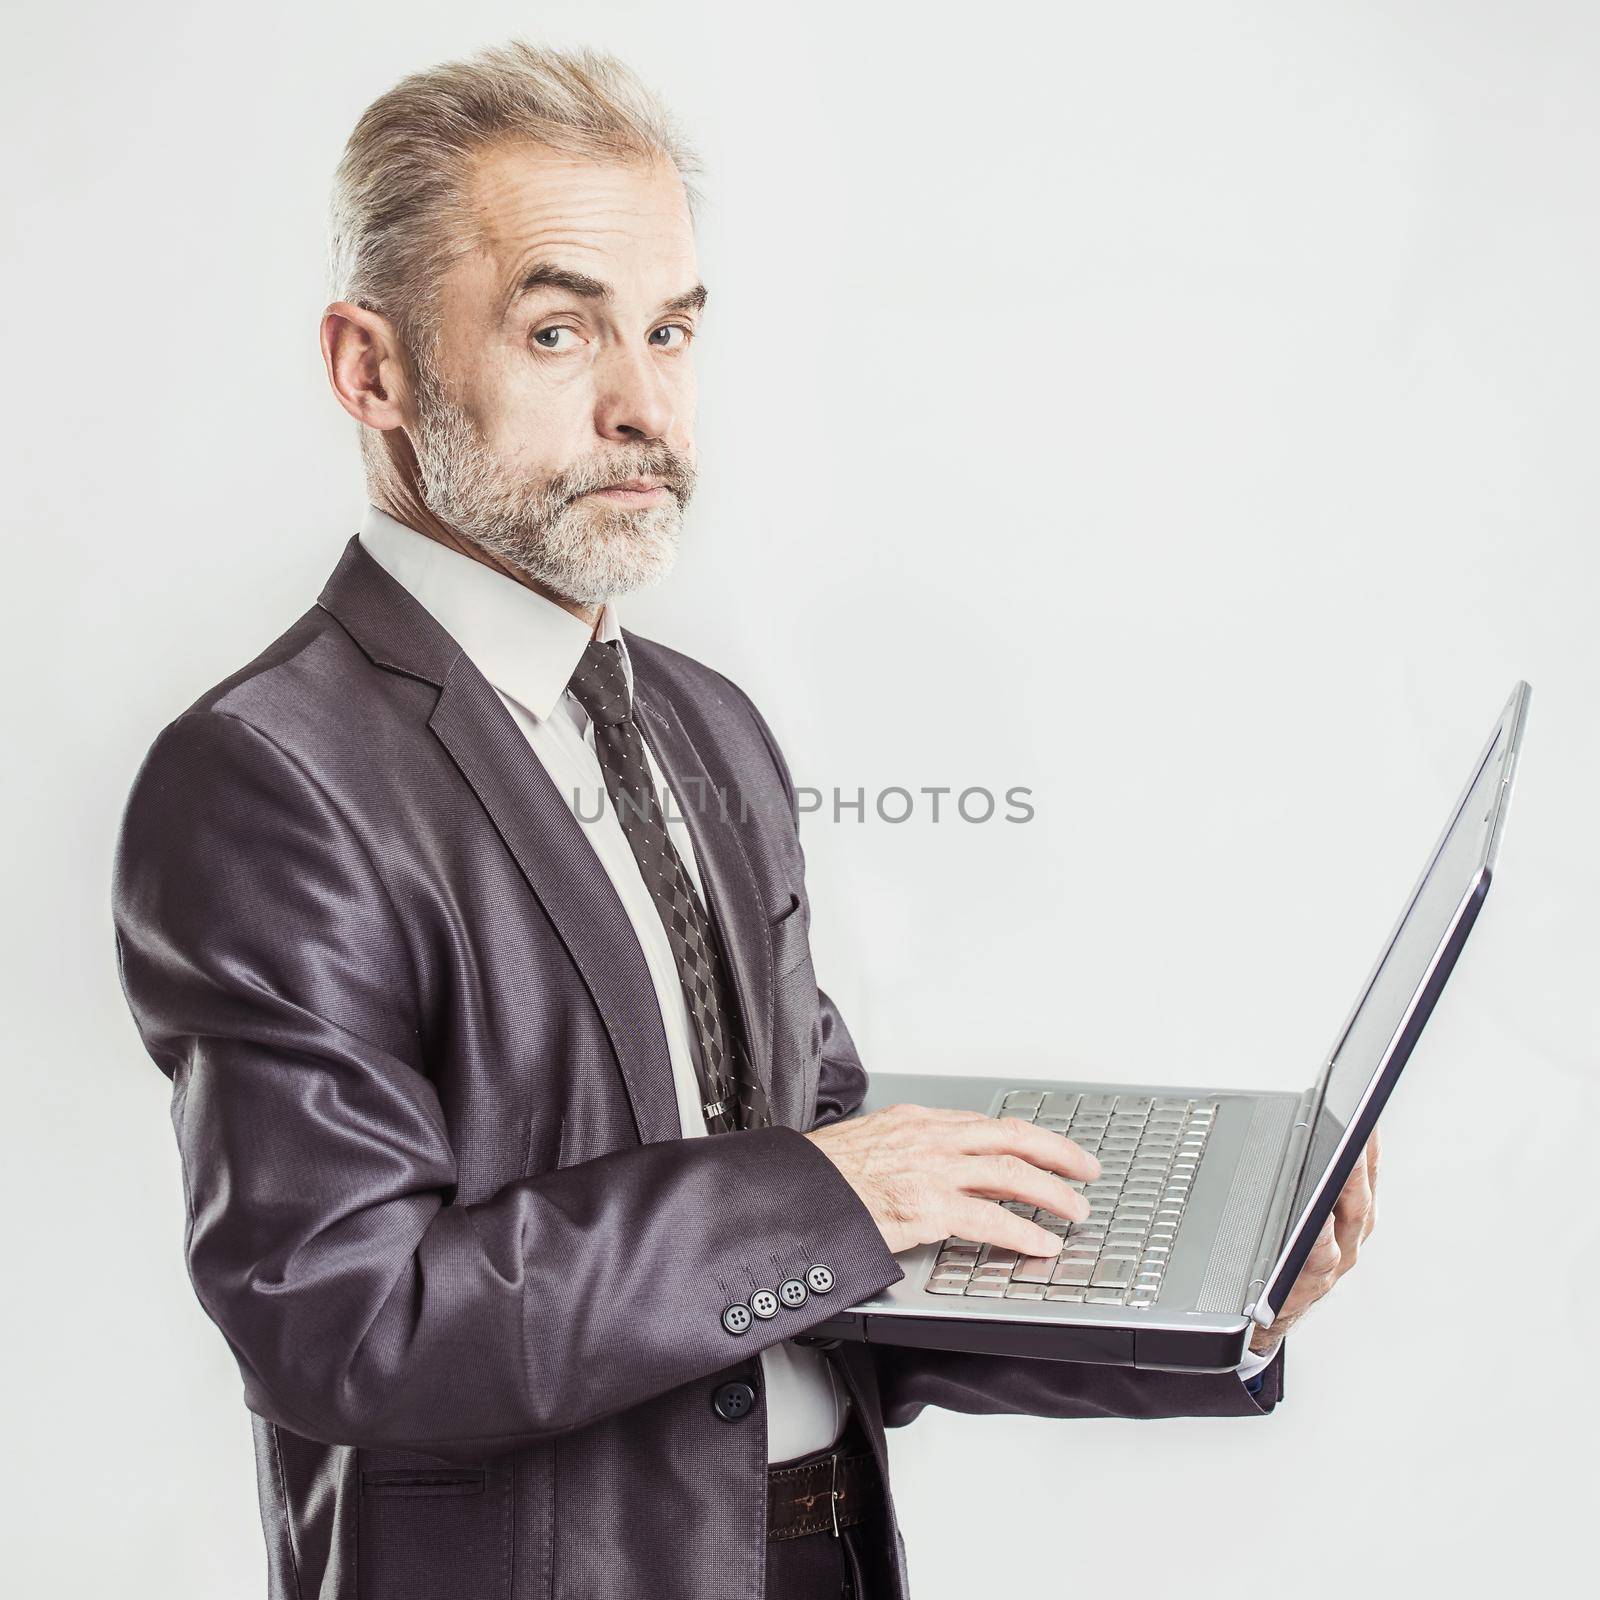 portrait in full growth - experienced businessman with an open laptop on a white background by SmartPhotoLab